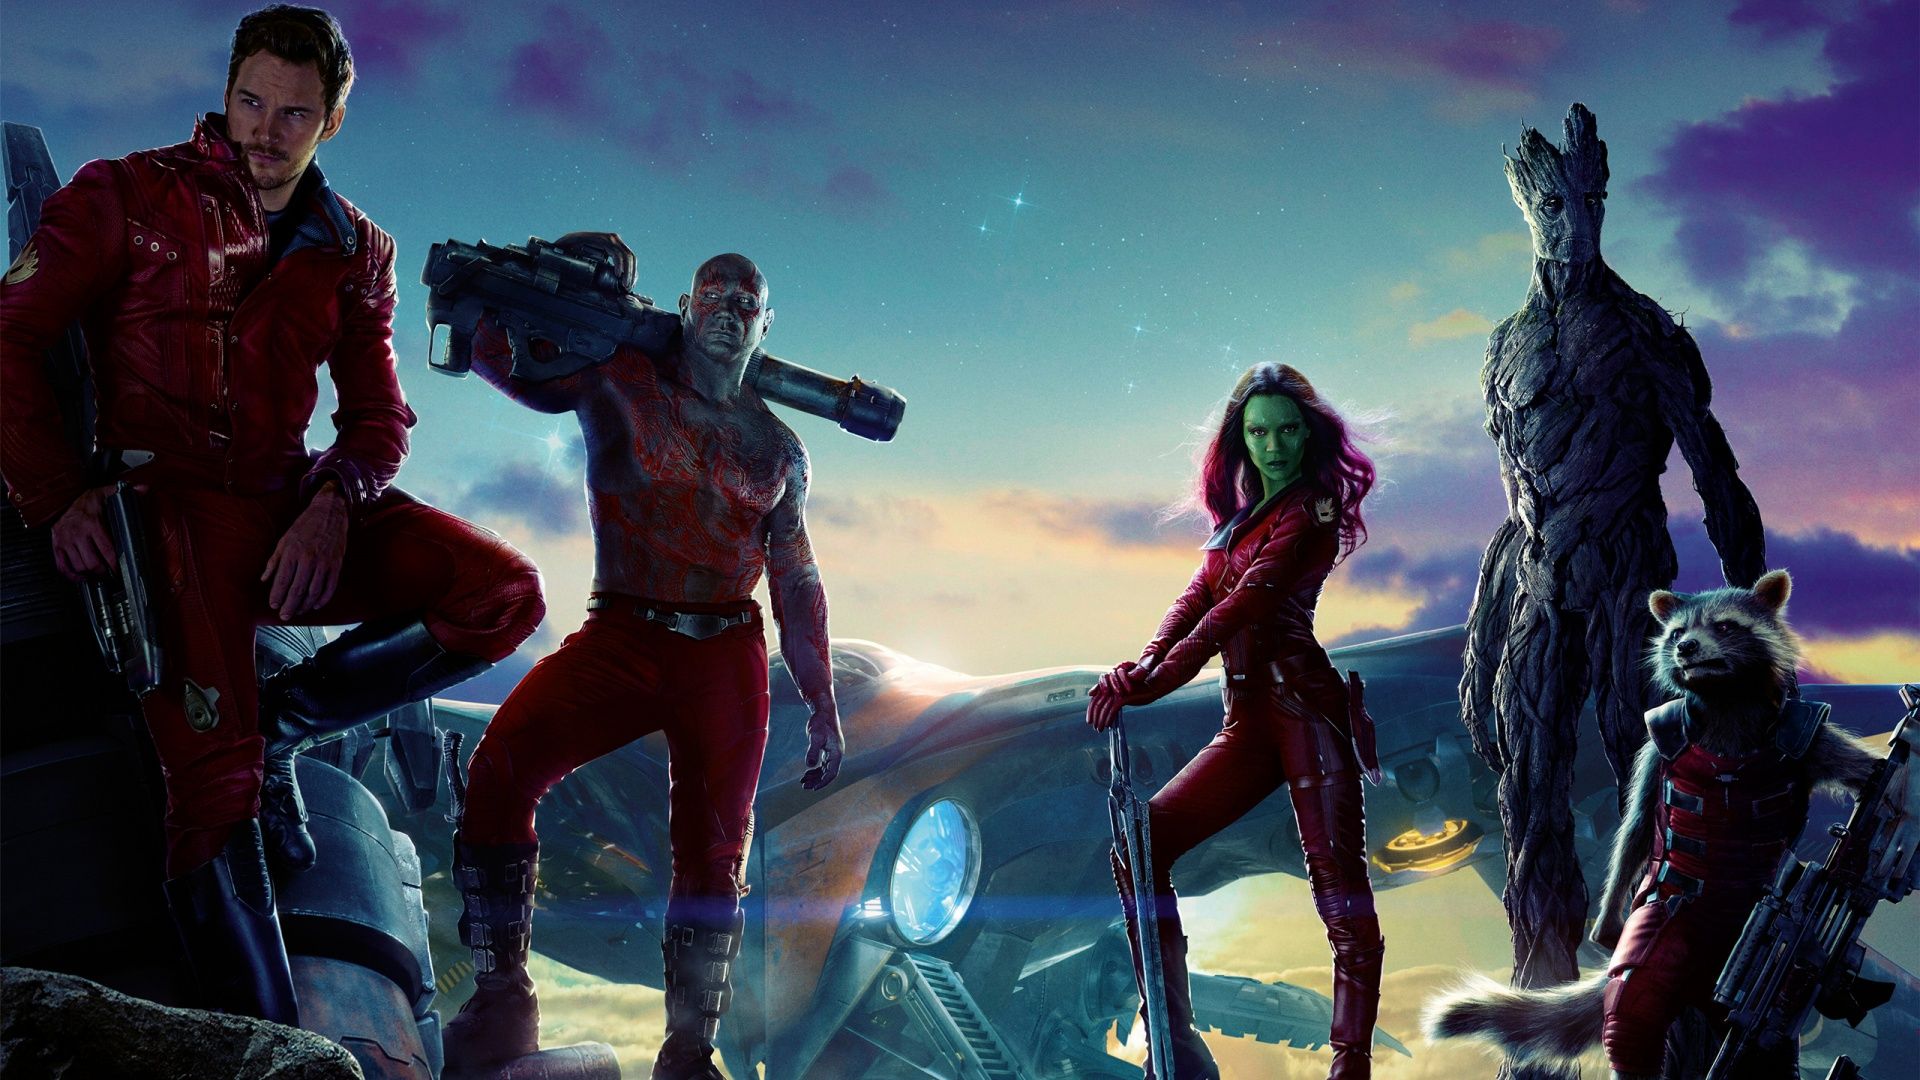 Free download Marvel Live action Movies image gardians of the galaxy HD [1920x1080] for your Desktop, Mobile & Tablet. Explore Marvel Movies Wallpaper. Marvel Movies Wallpaper, Movies Wallpaper, Wallpaper Movies